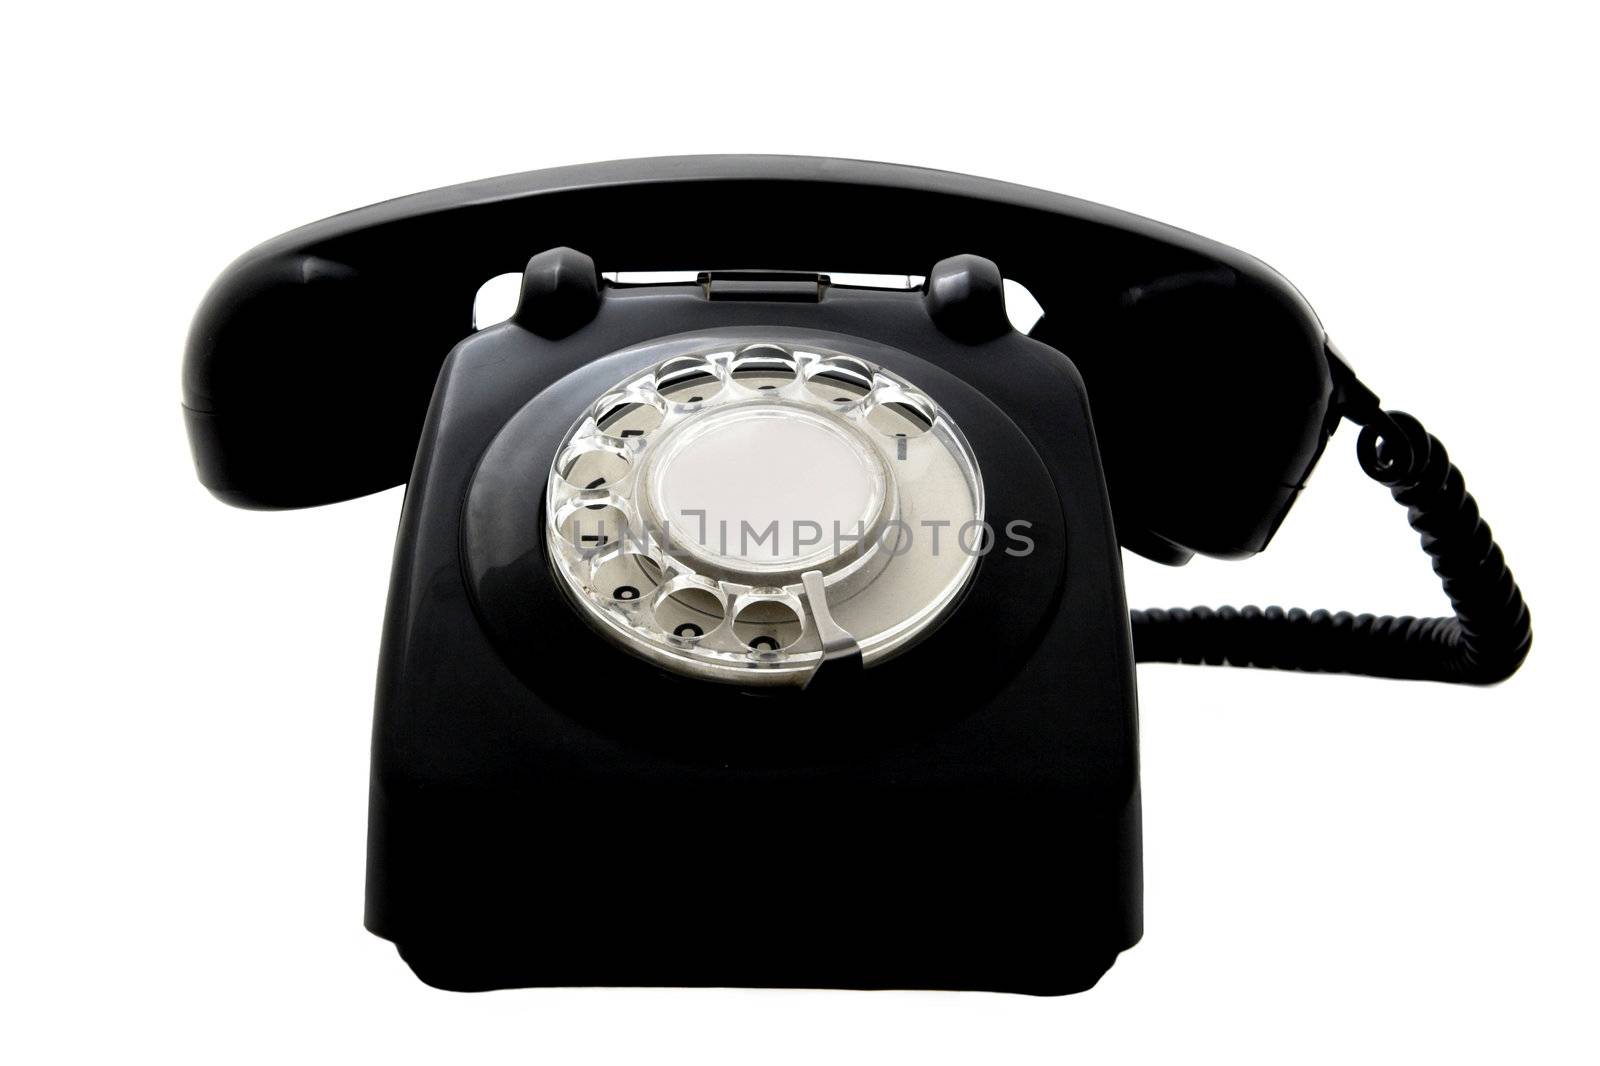 Vintage phone isolated in a whit